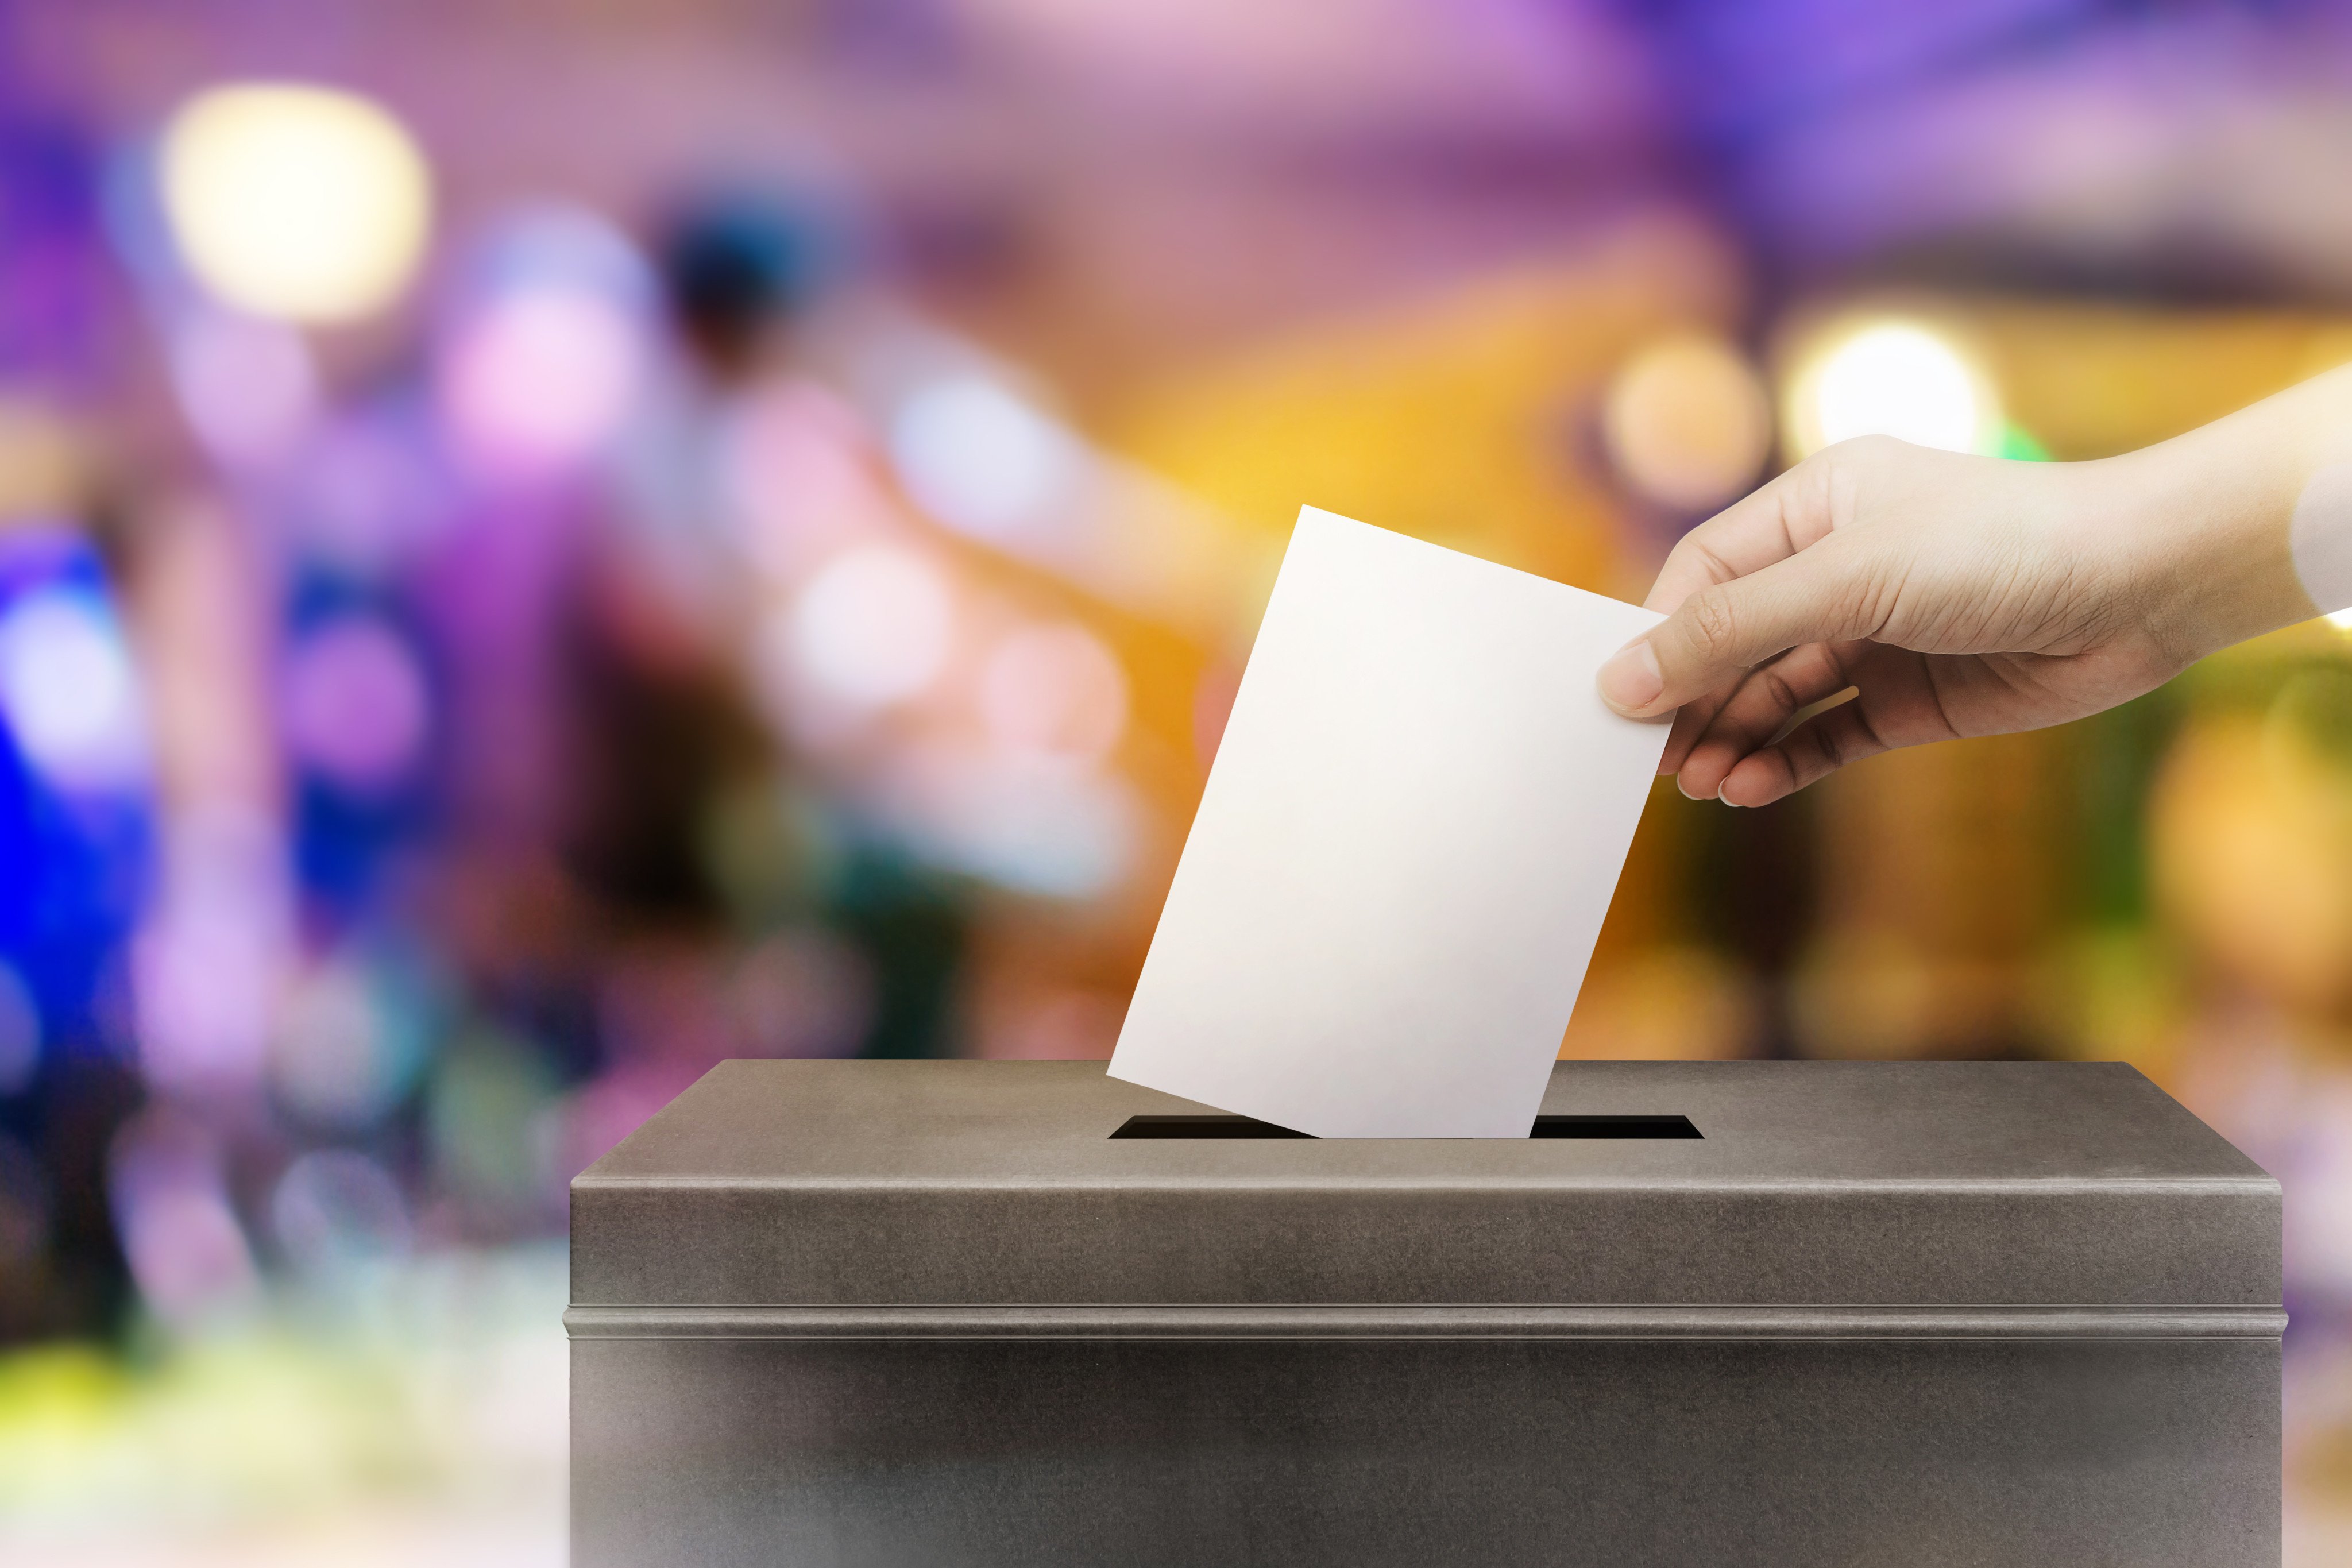 This year’s election calendar is packed, with more than 60 countries heading to the ballot box. Photo: Shutterstock Images